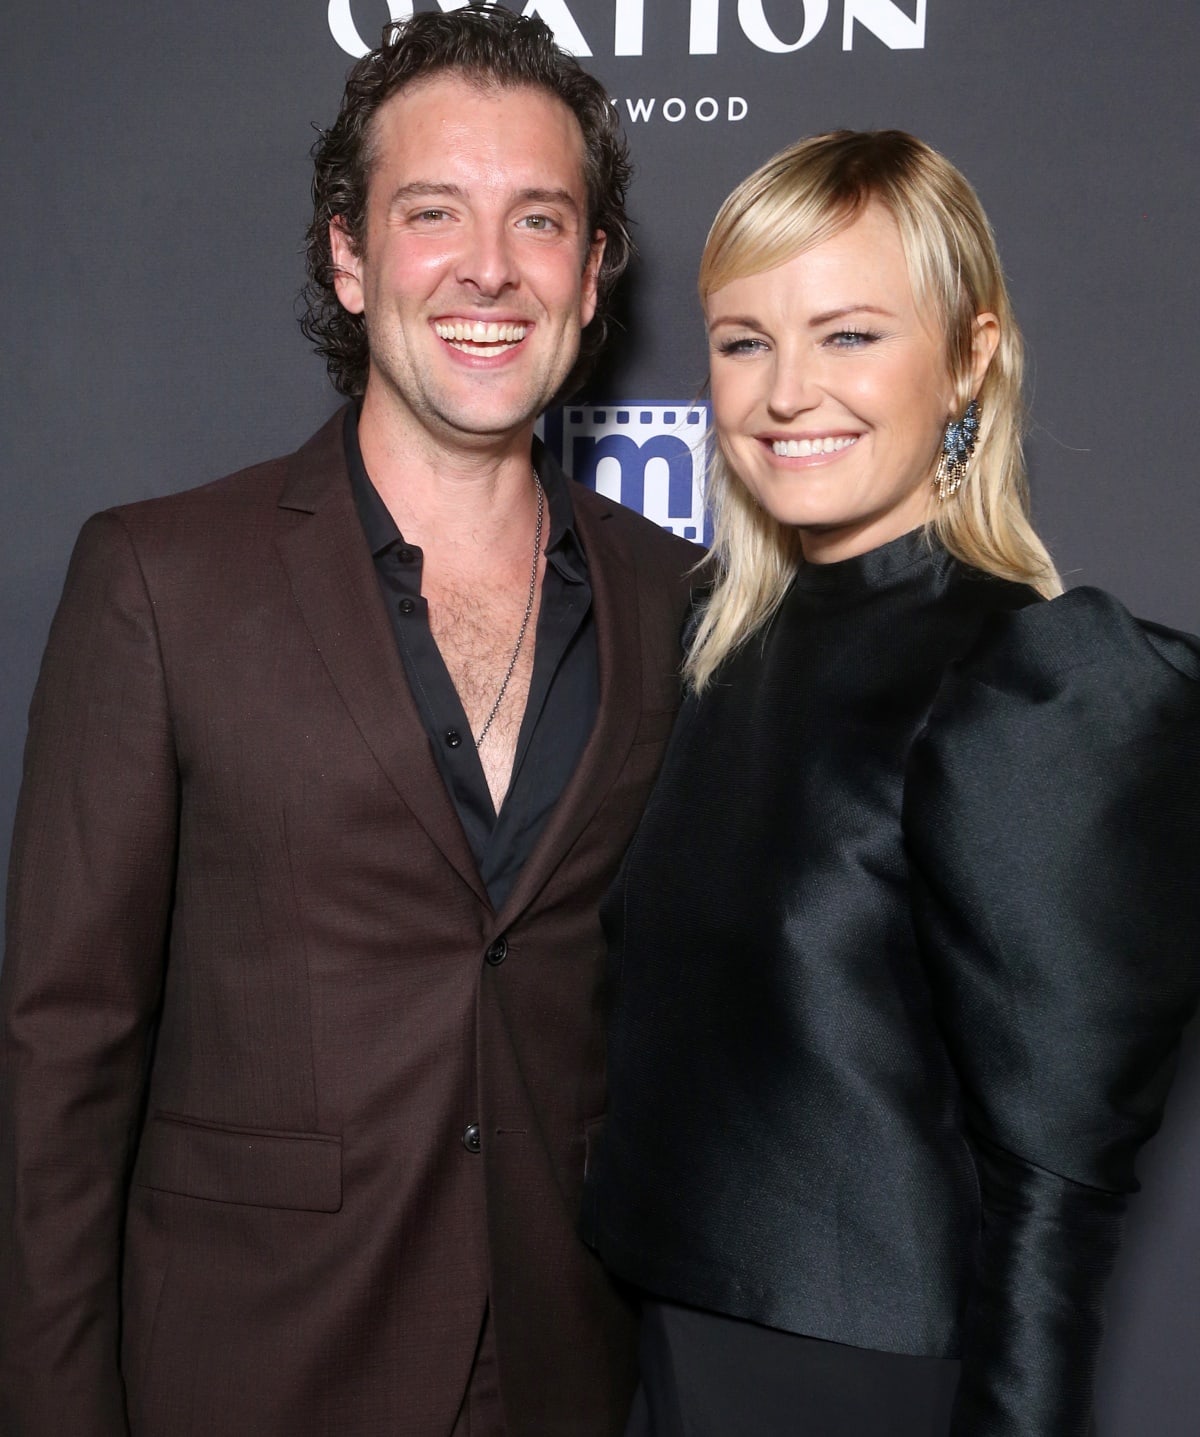 Jack Donnelly and Malin Akerman attending the Screamfest LA world premiere of The Avenue’s Slayers